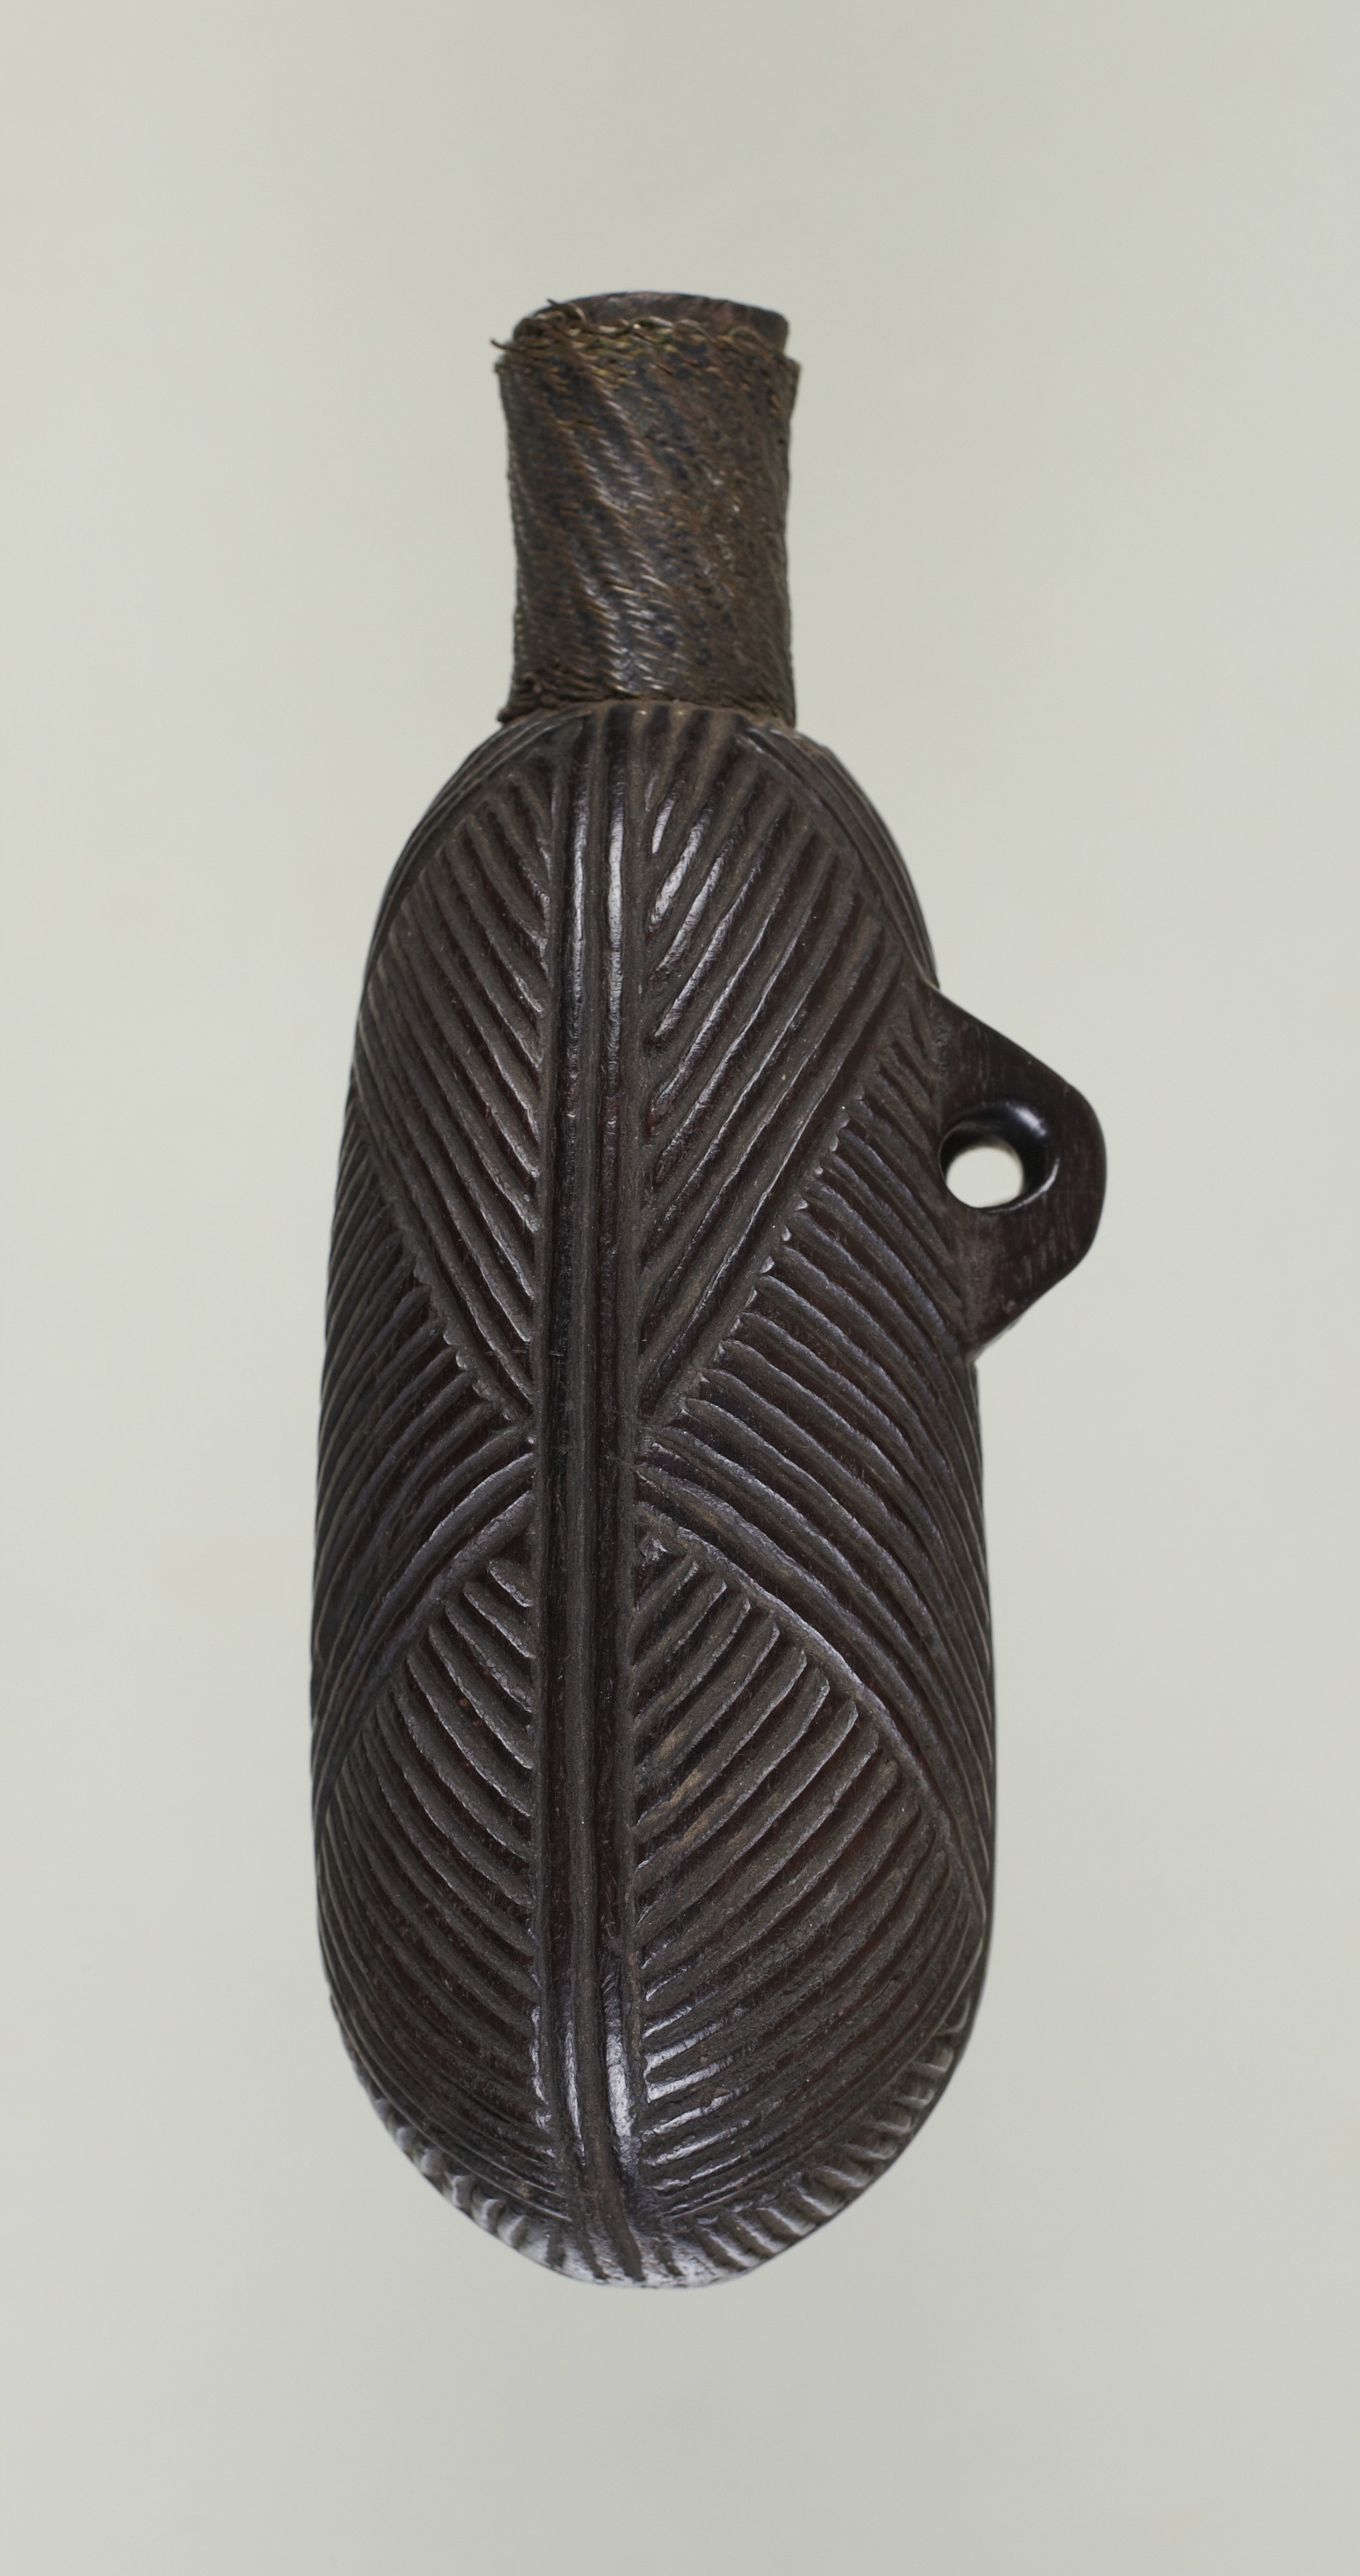 Snuff container (1998-557)